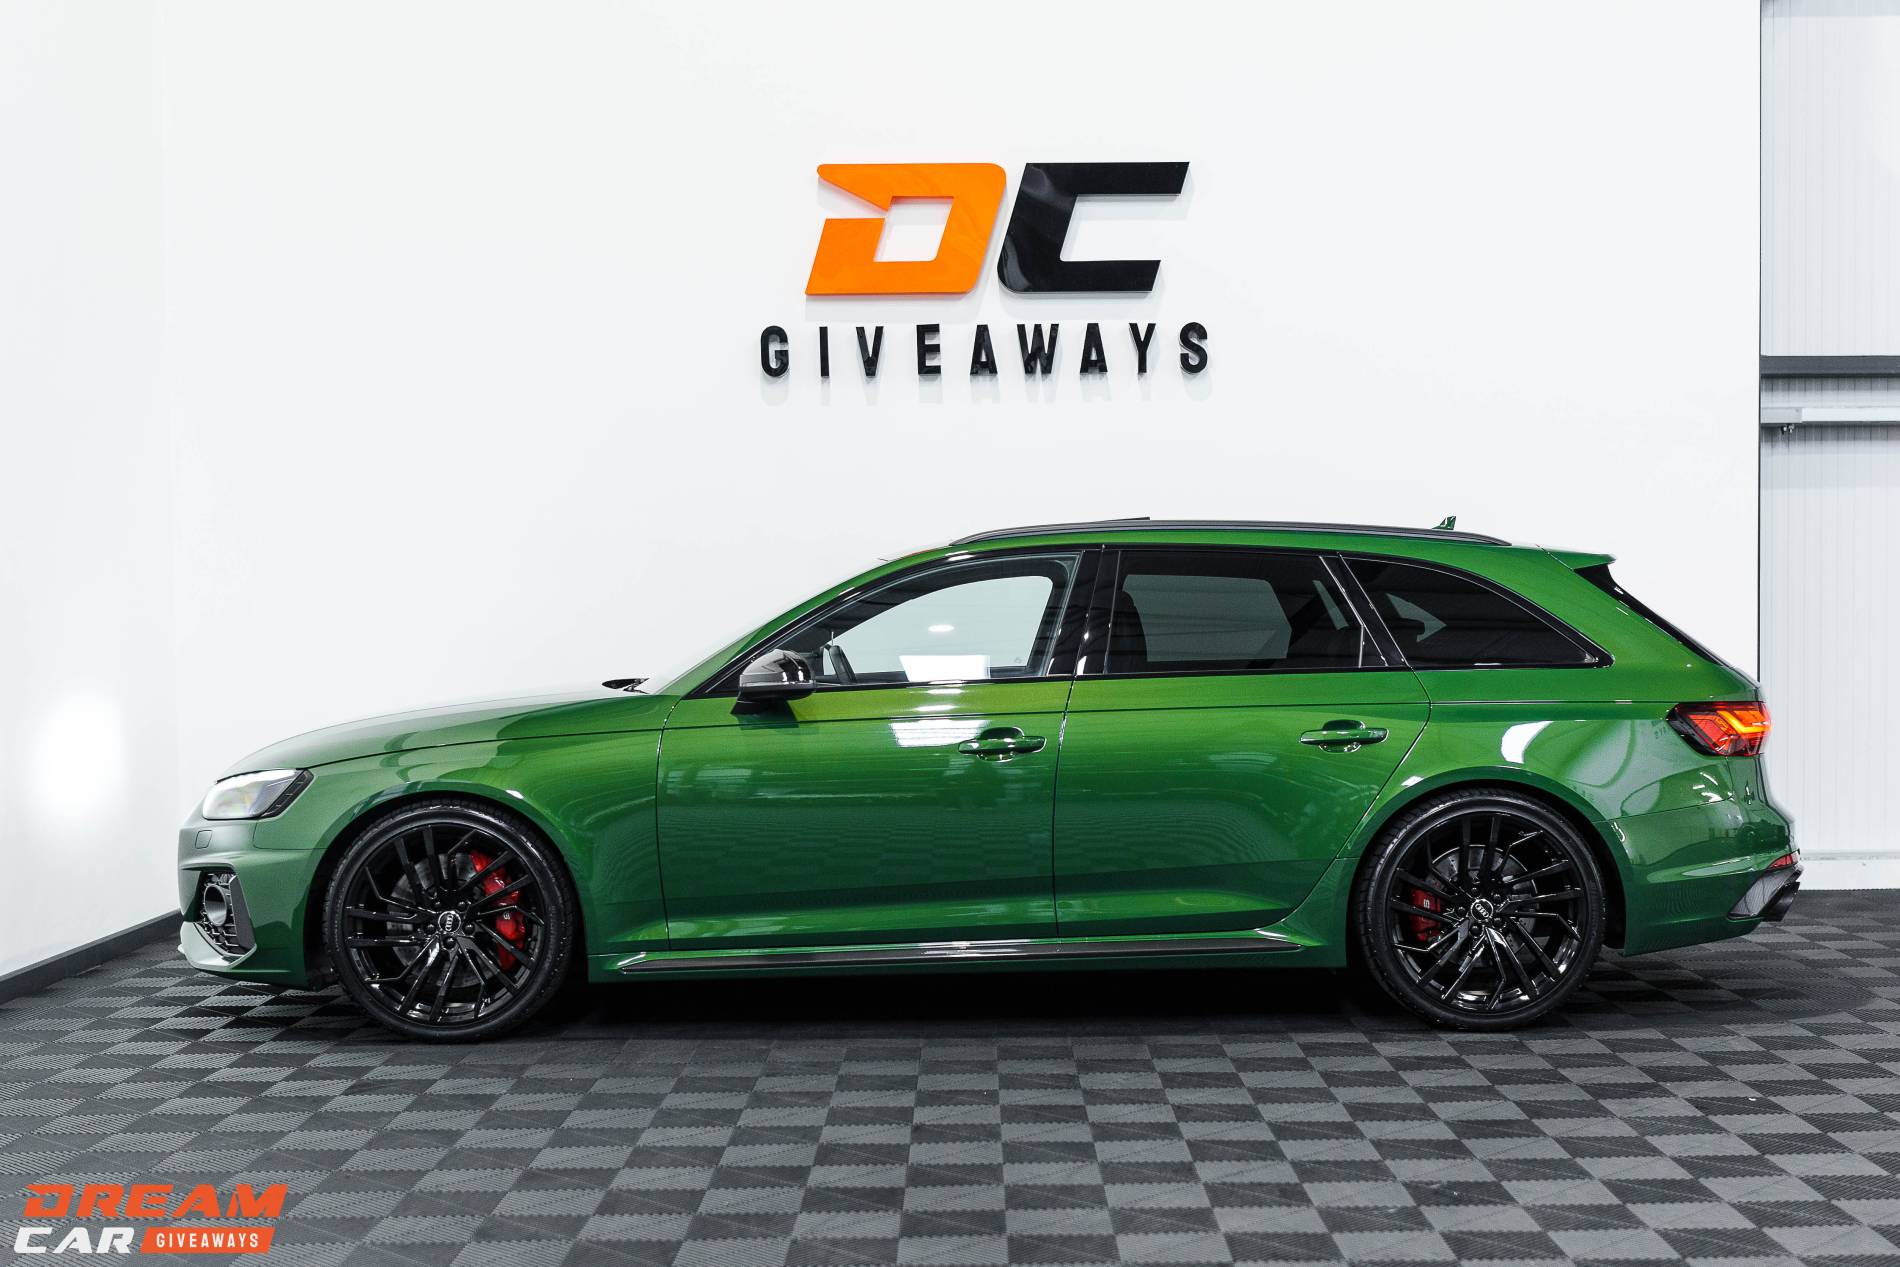 Win This Audi RS4 & £1,000 or £42,000 Tax Free